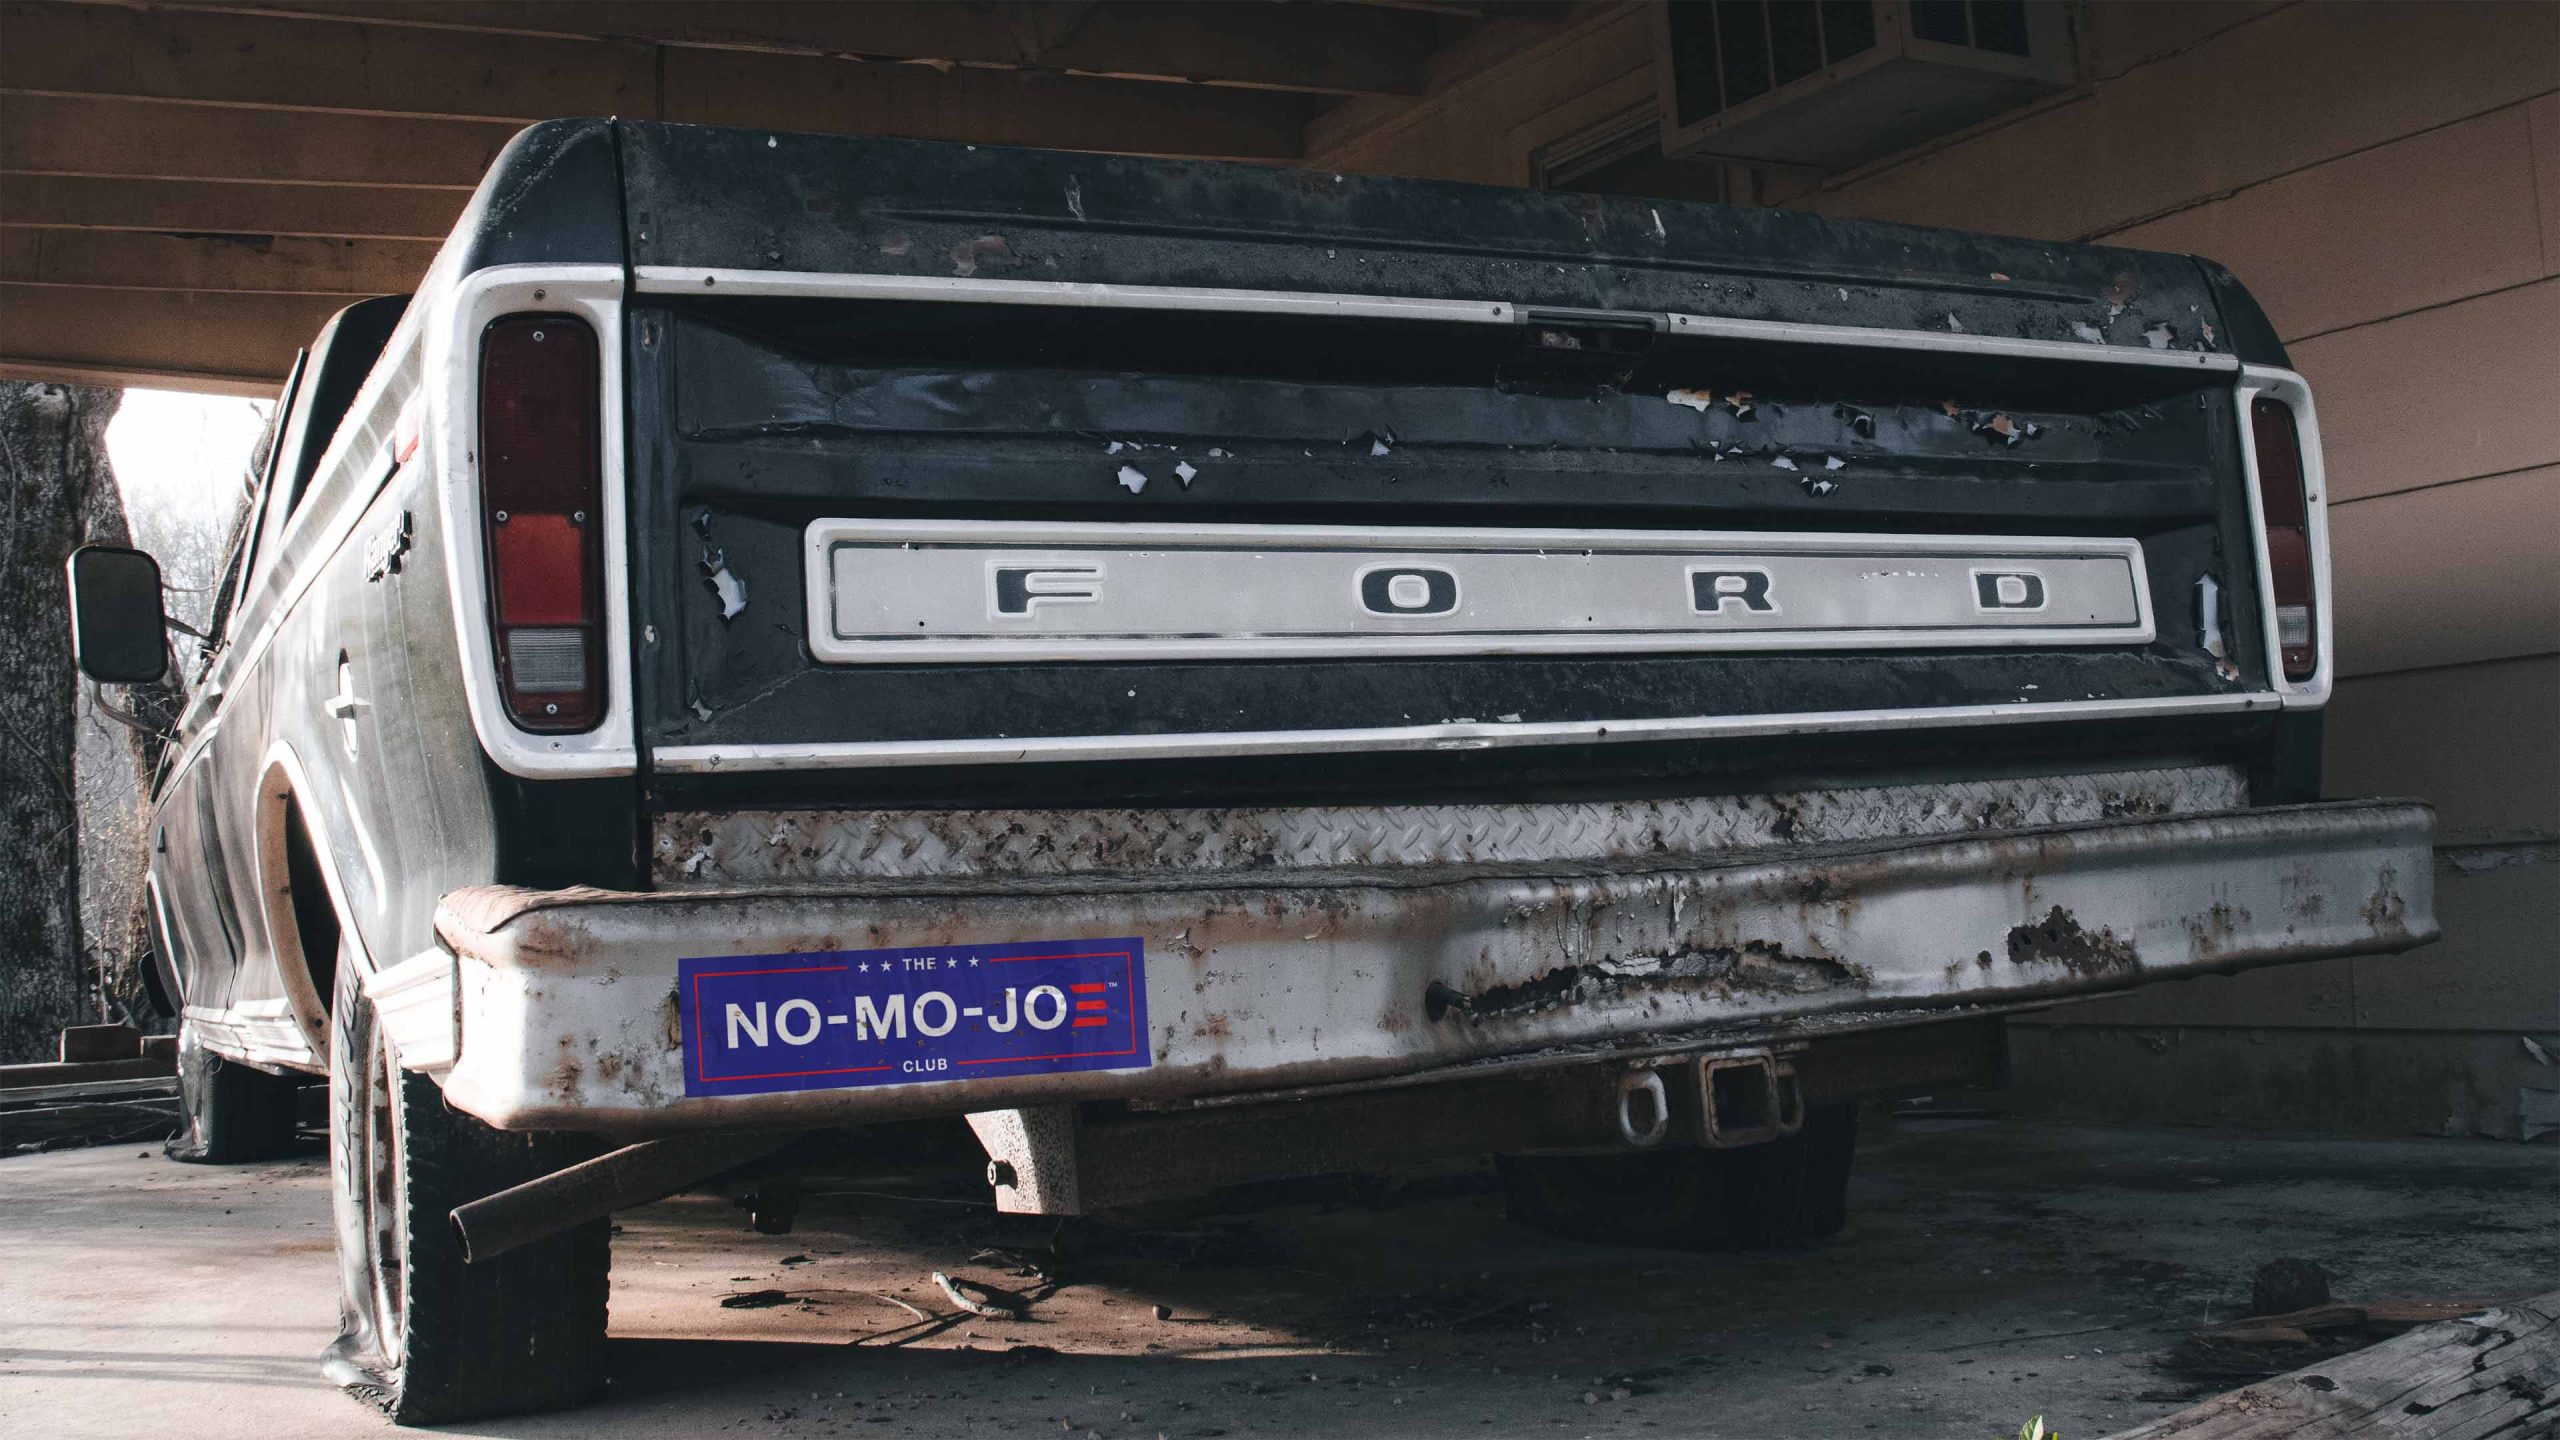 The No-Mo-Joe Club™ bumper sticker on Vintage, Blue Ford pickup truck parked in shop.